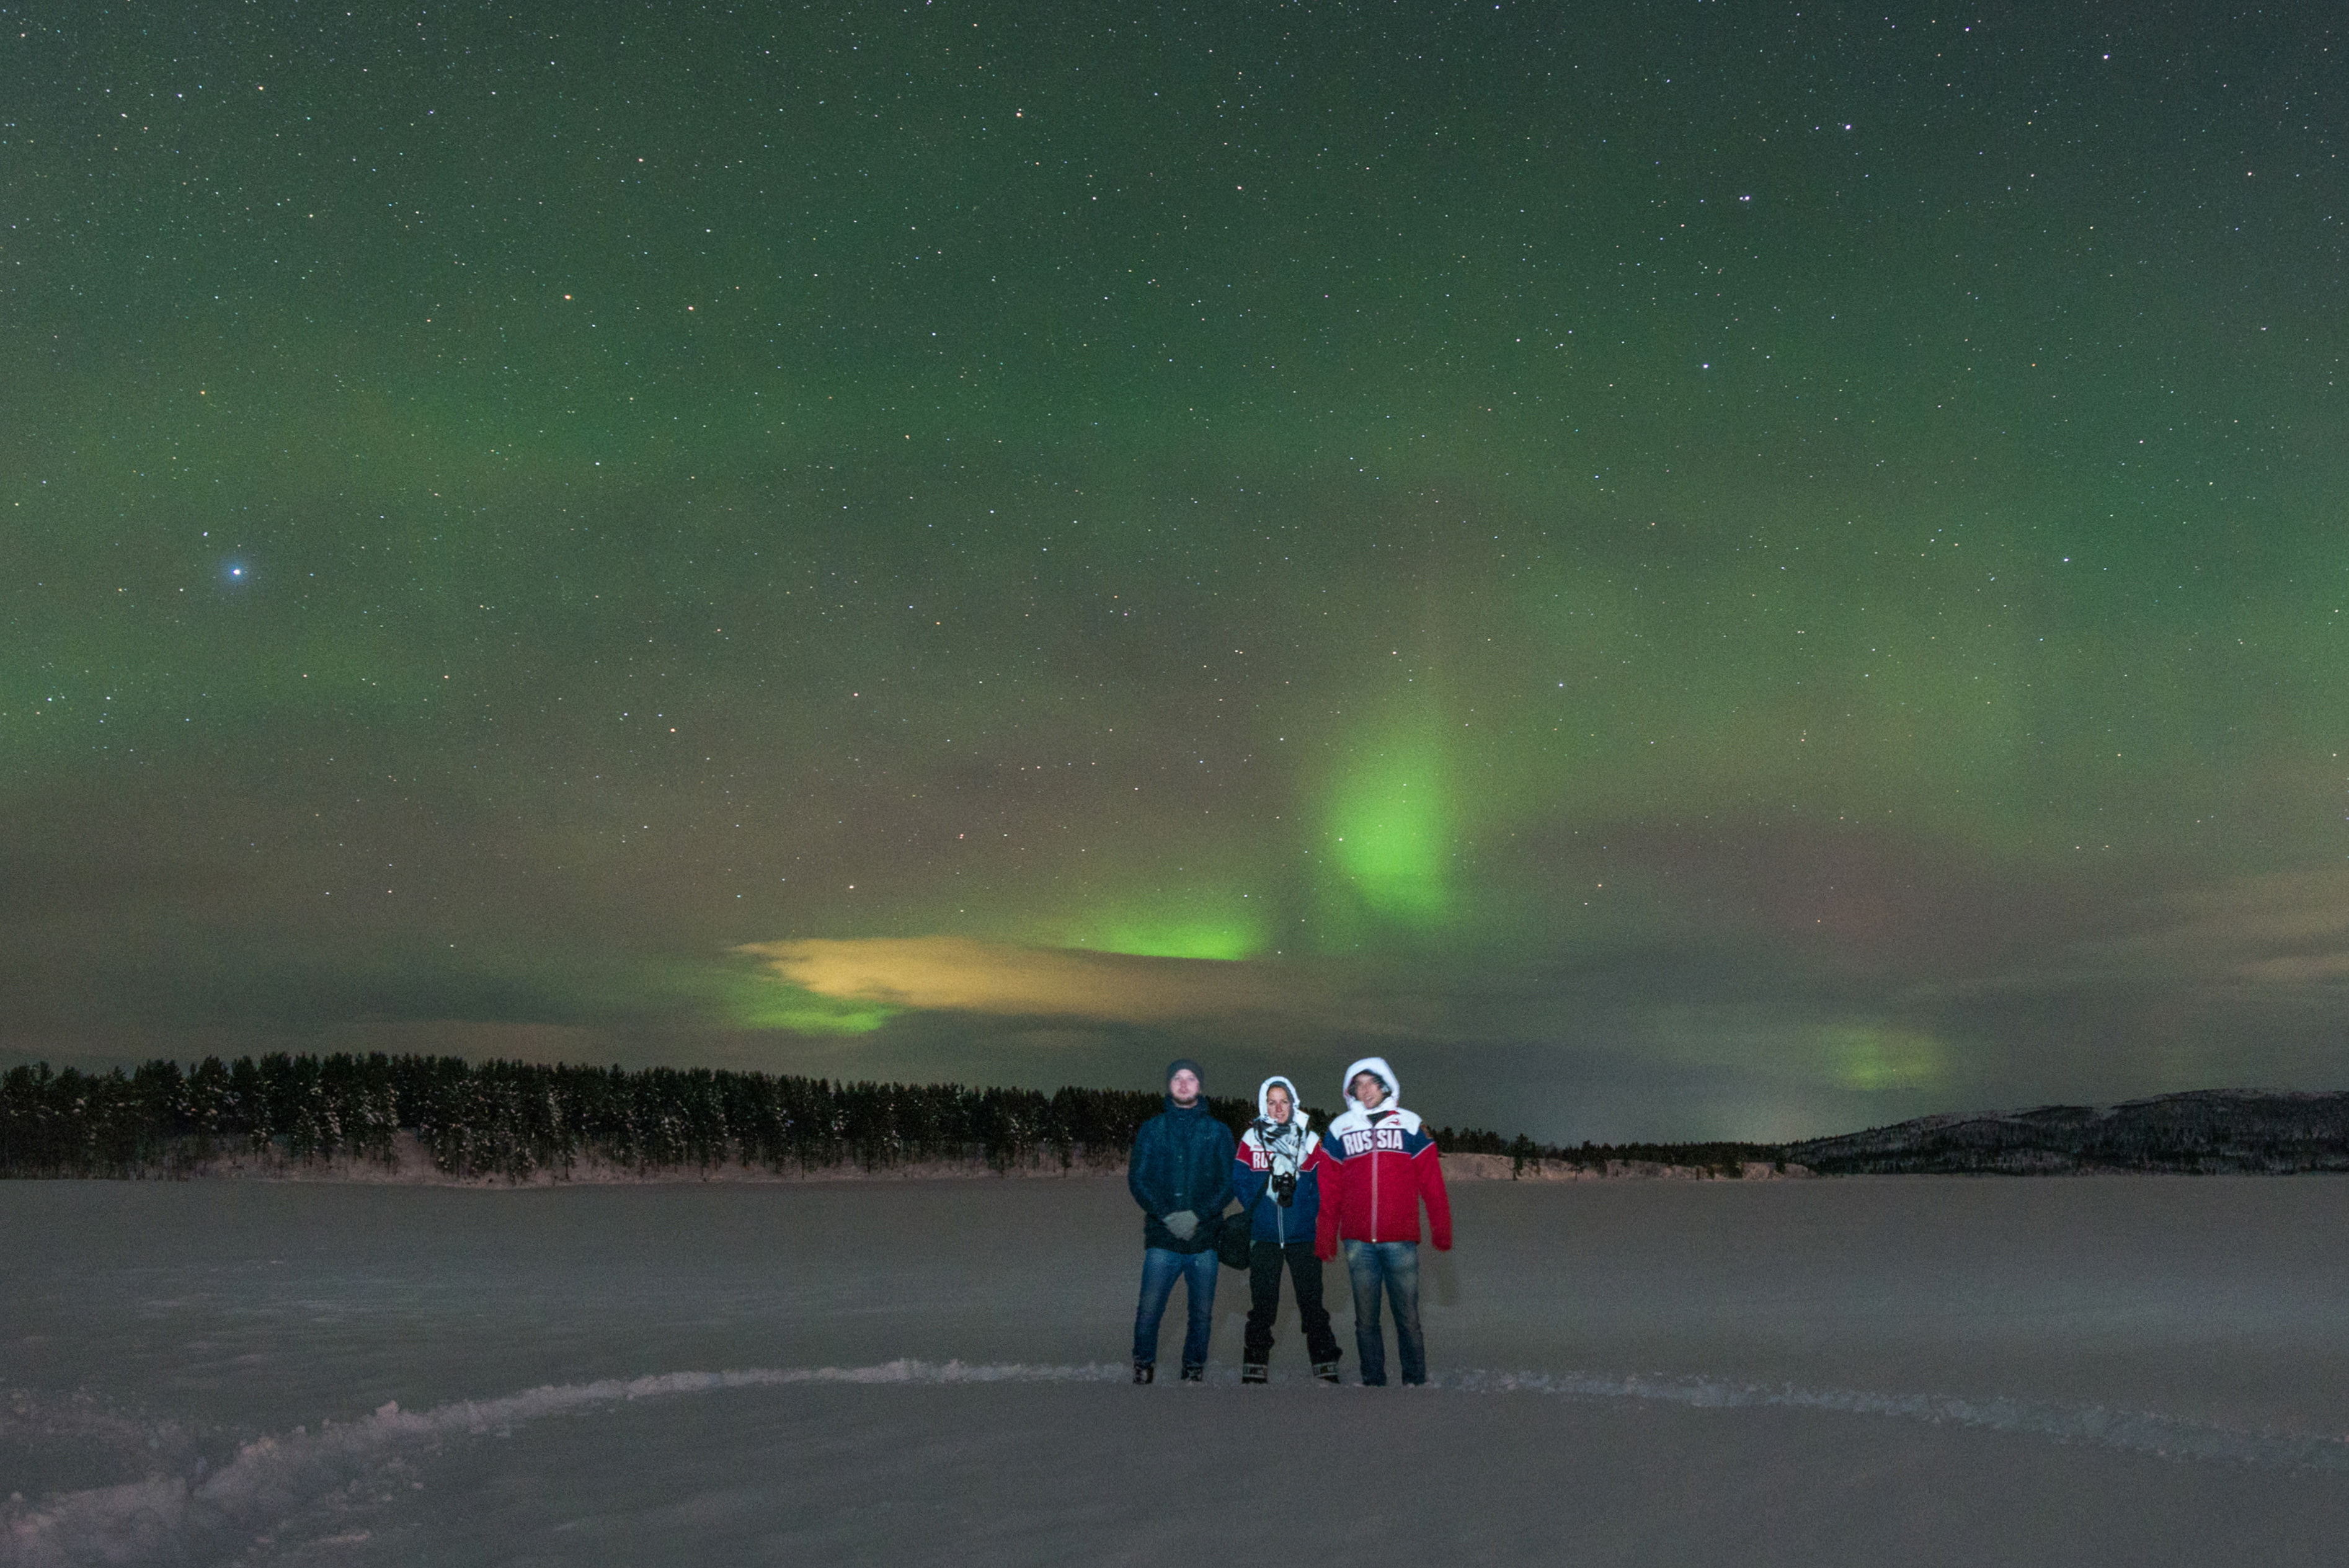 "We stopped near a large field and everyone marched through the snow to the spot that would serve as the vantage and photo point. There were about 30 people that evening eager to see the Northern Lights that night. And see them we did!" Source: Maria Stambler